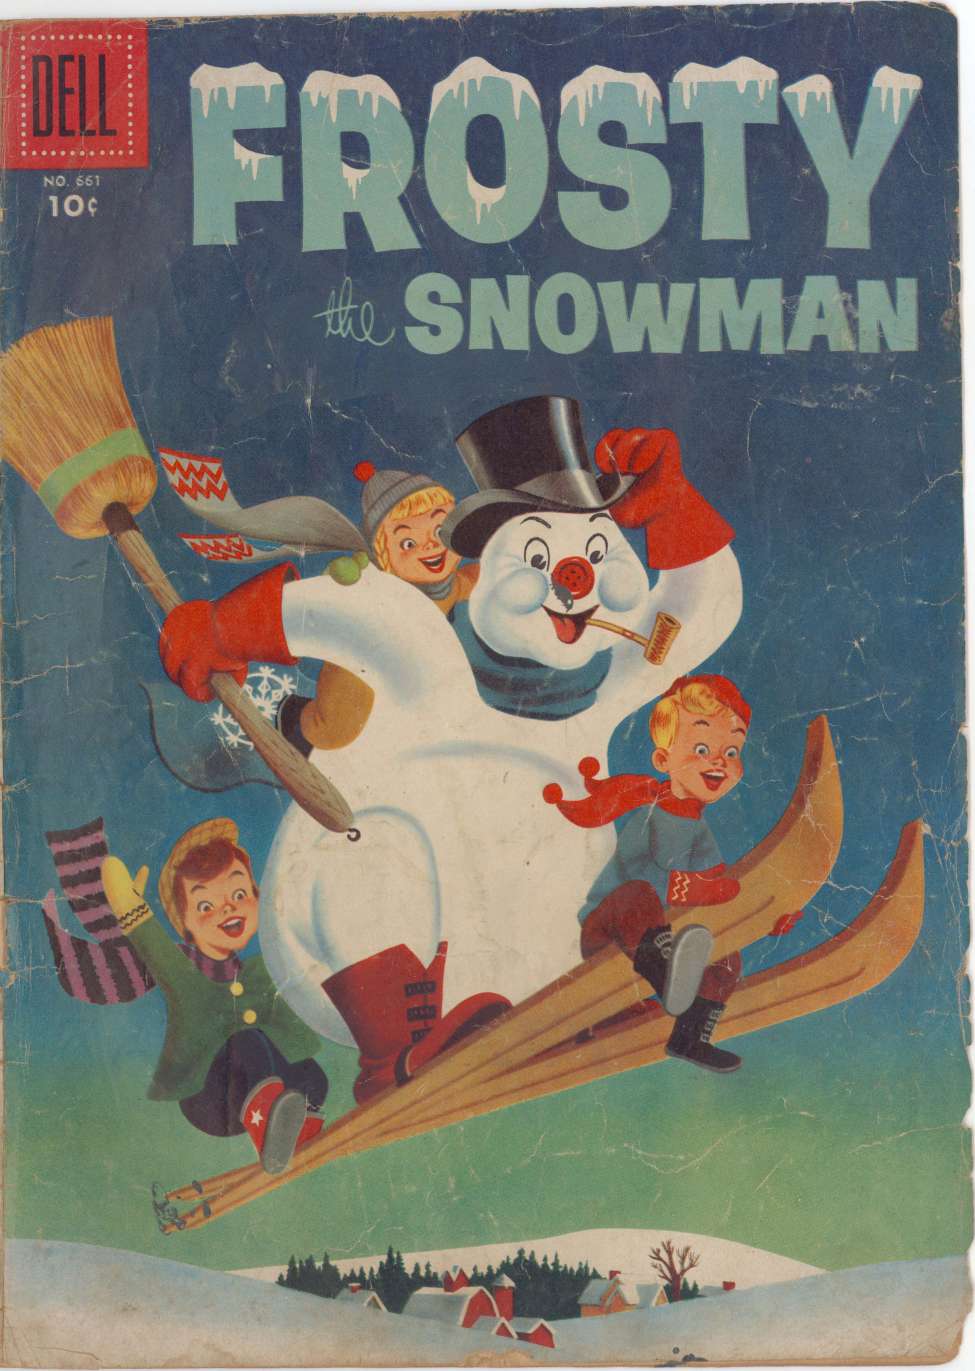 Frosty the snowman comic